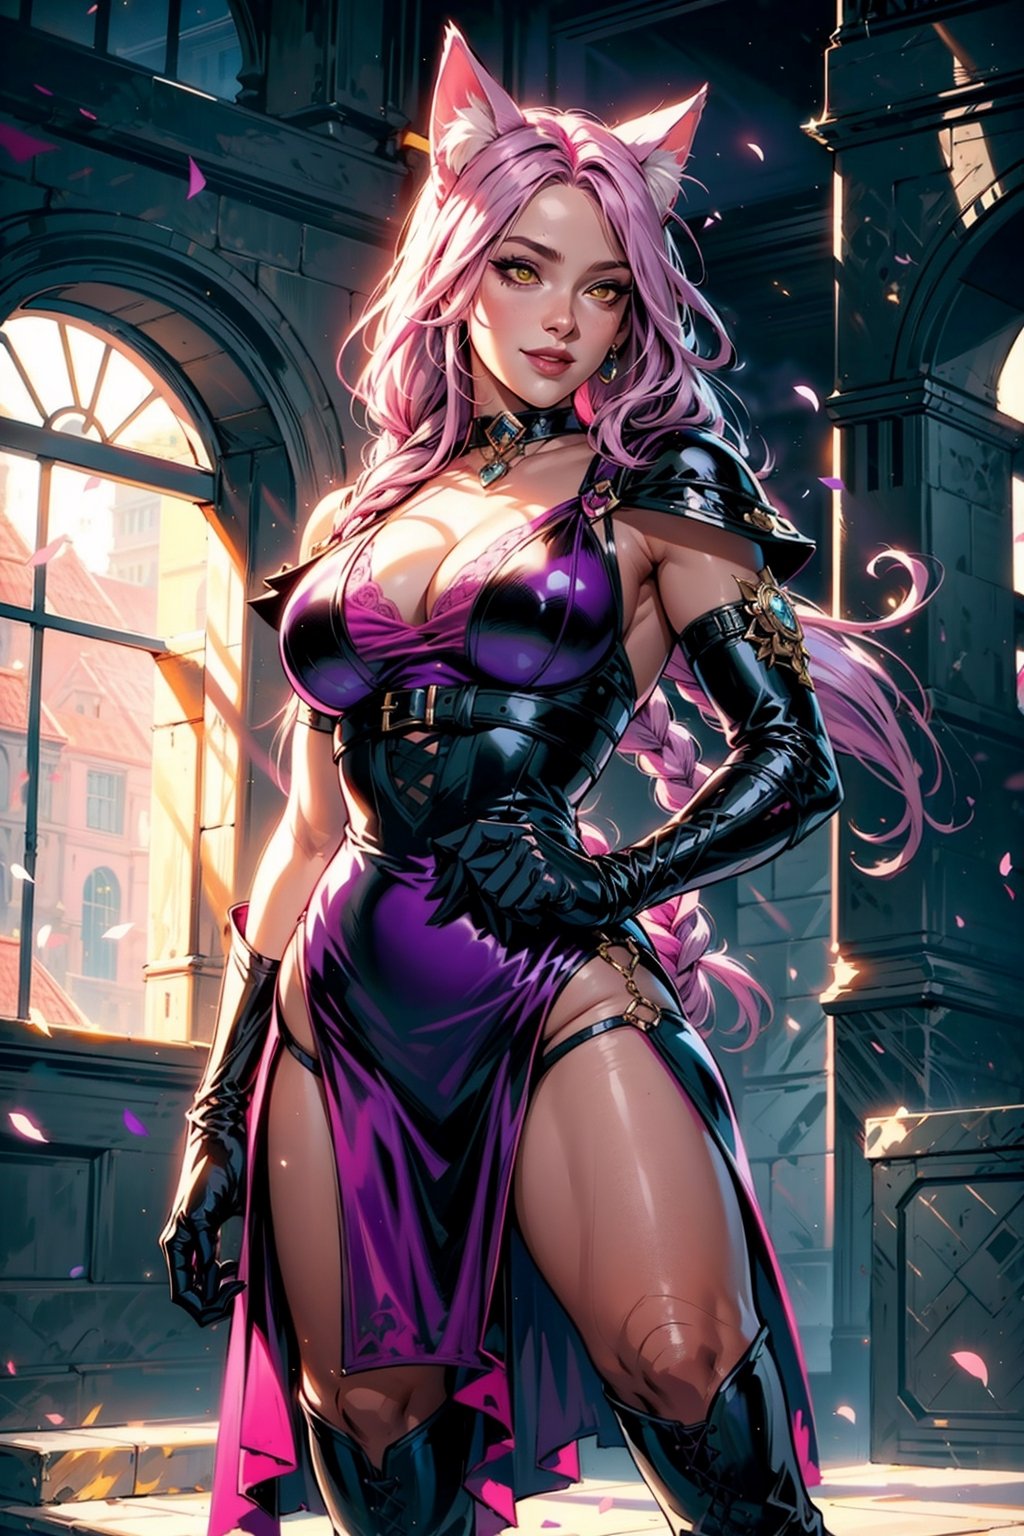 1girl, Portrait of the beautiful Lopadex, athletic, purple dress:1.2, pink hair:1.2, yellow eyes:1.2, pink cat ears:1.2, black leather boots, black leather gloves, smiling,braids,make up,chocker,cleavage,voluminous lighting, Best Quality, Masterpiece, intricate details, tonemapping, sharp-focus, hyper detailed, Trending on ArtStation, manga,(full_body:1.4)